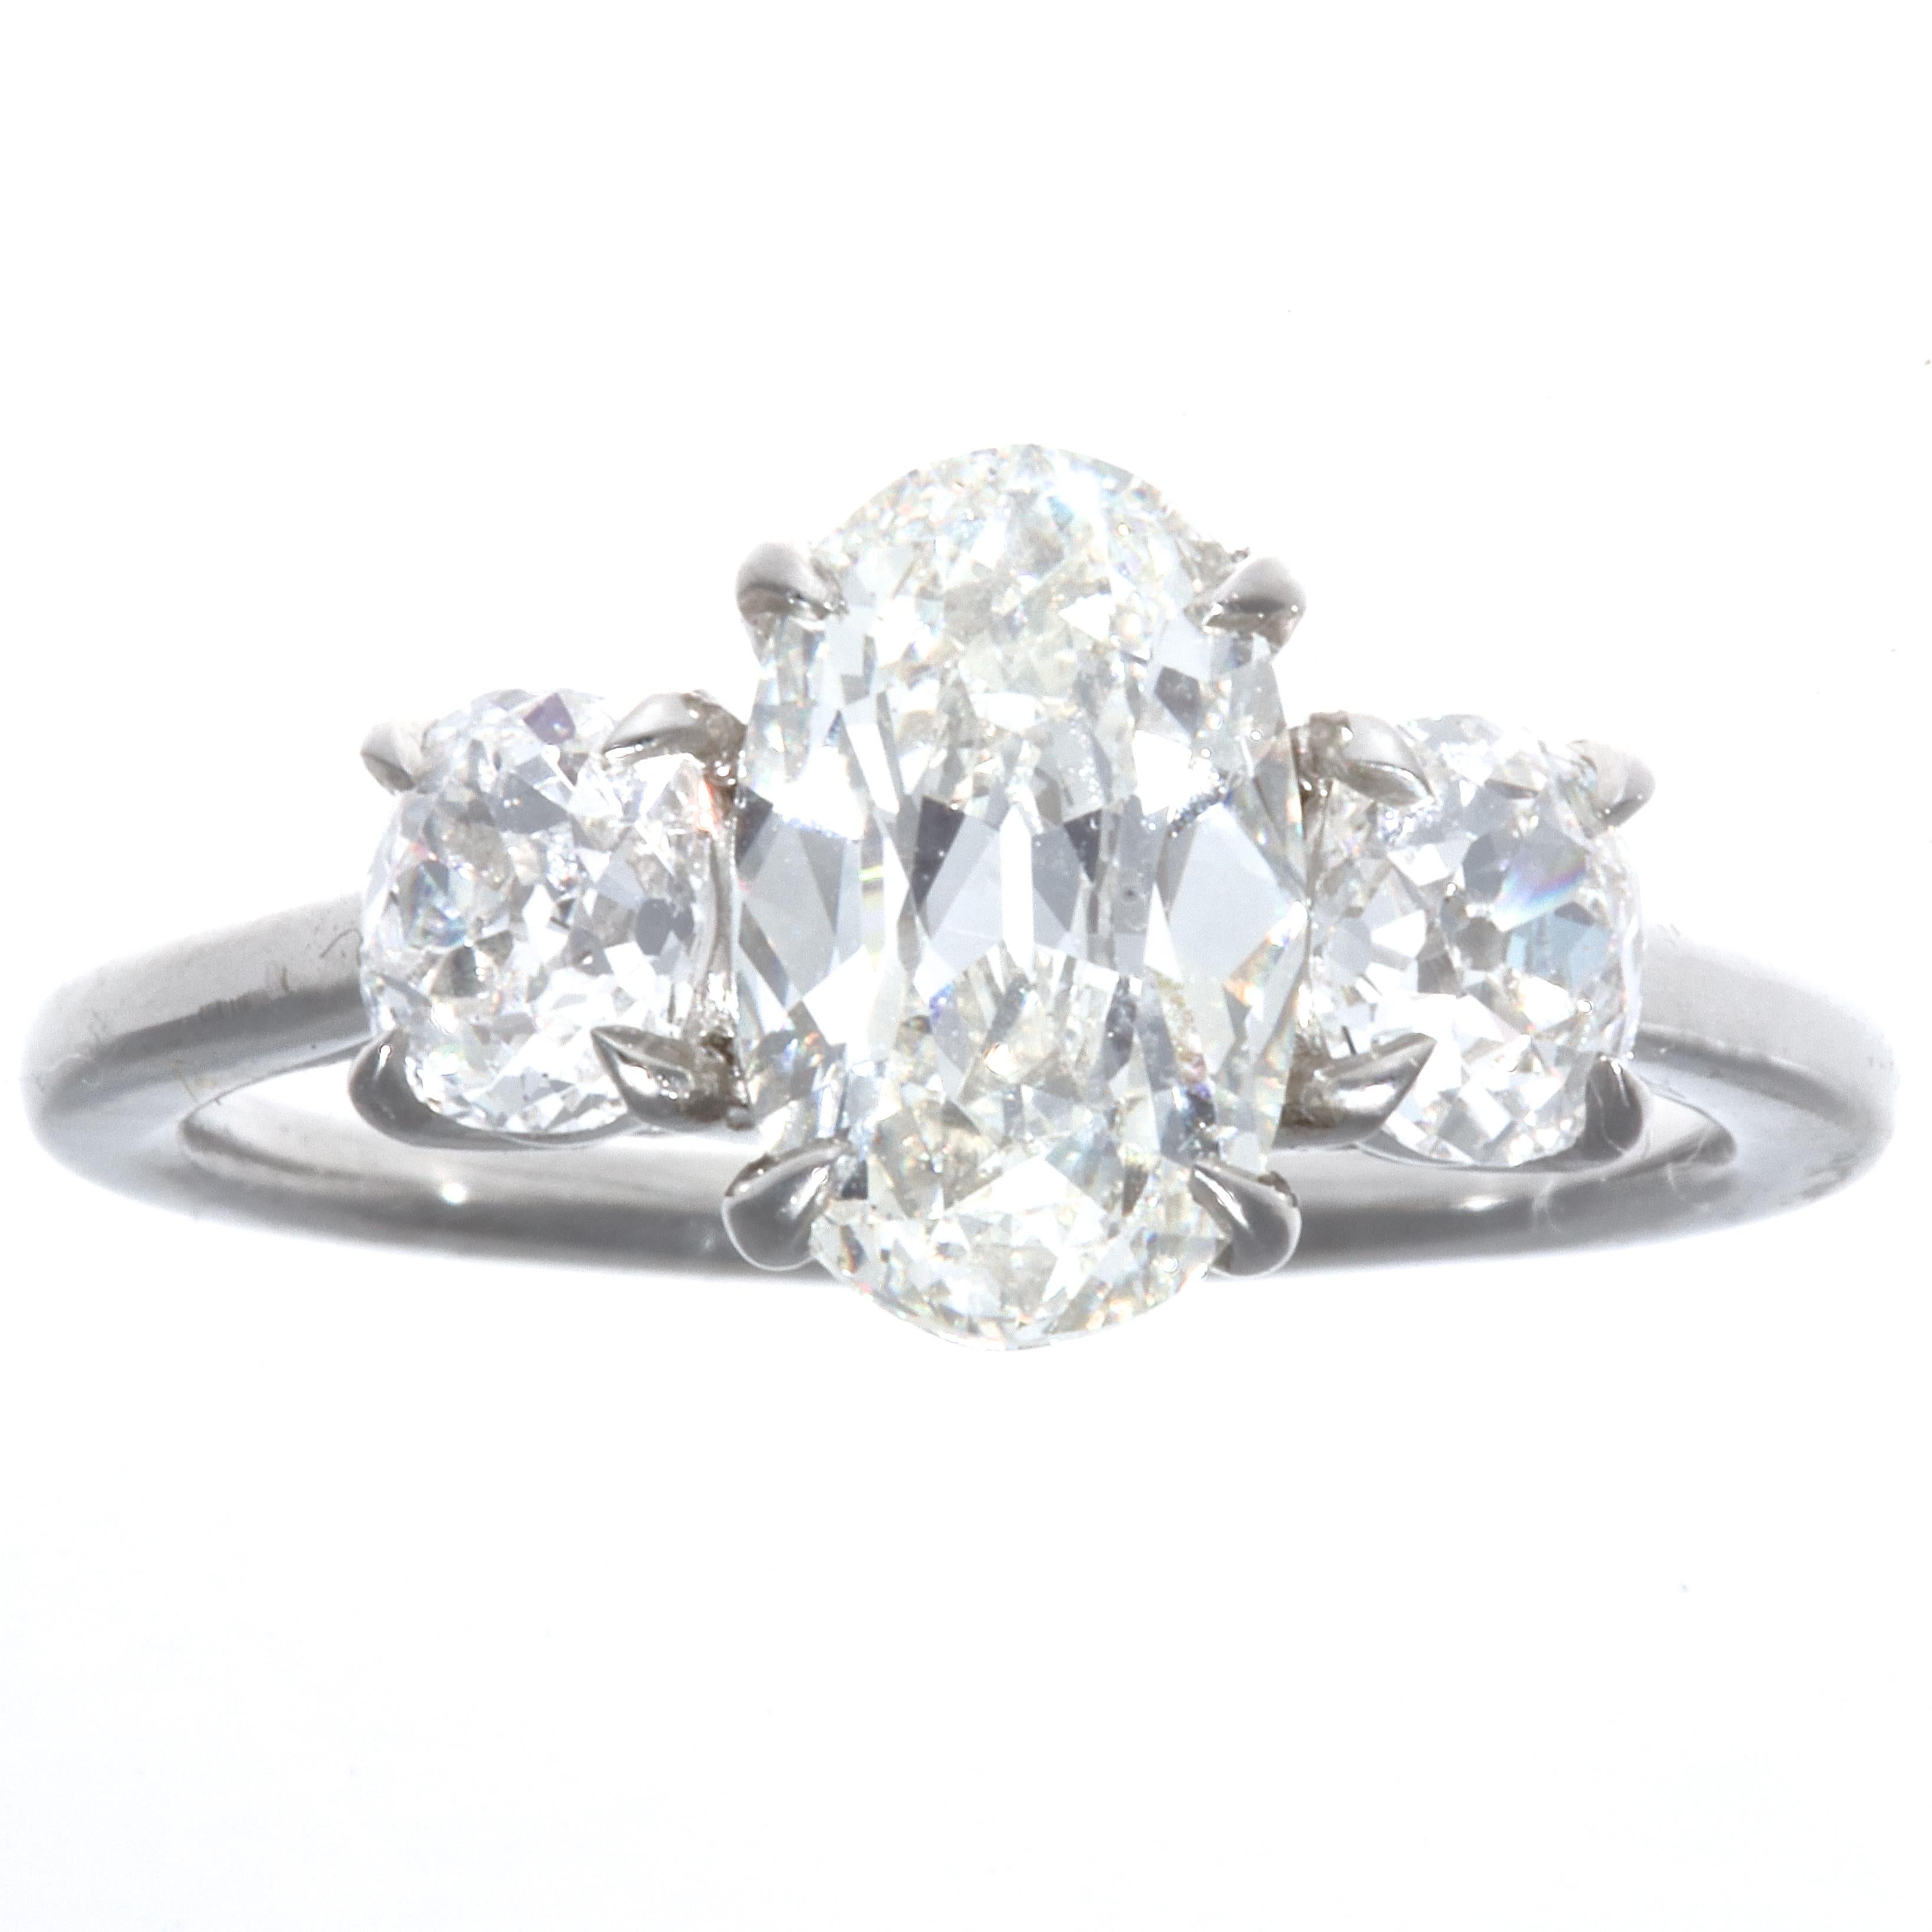 Hard to believe the center stone weighs only 1.64 carats. The oval brilliant cut is unique and full of life. GIA certified J color, VVS1 clarity.  Accented by two old mine cut diamonds weighing  approximately  0.70 carats, G-H color SI clarity. The